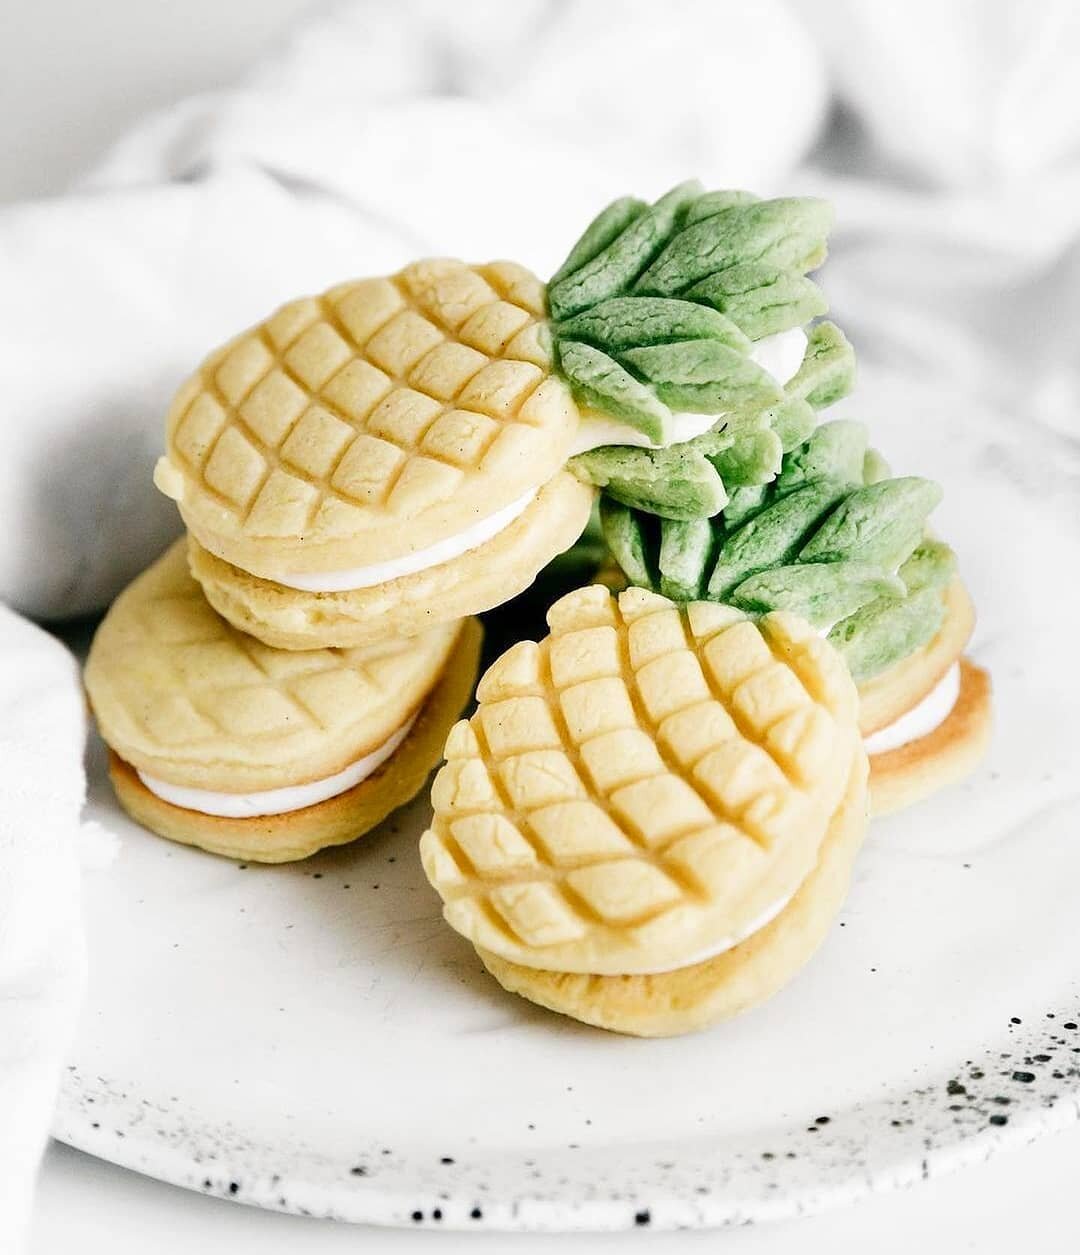 Some delicious soft vanilla sandwich cookies with pineapple buttercream coming your way 🍍
.
.
.
.
.
Photo and recipe: @heathershomebakery
#cookies #cookiesofinsta #cookiegram #delicious #pineapple #buttercream #foodblogfeed #beautifulcuisines #desse